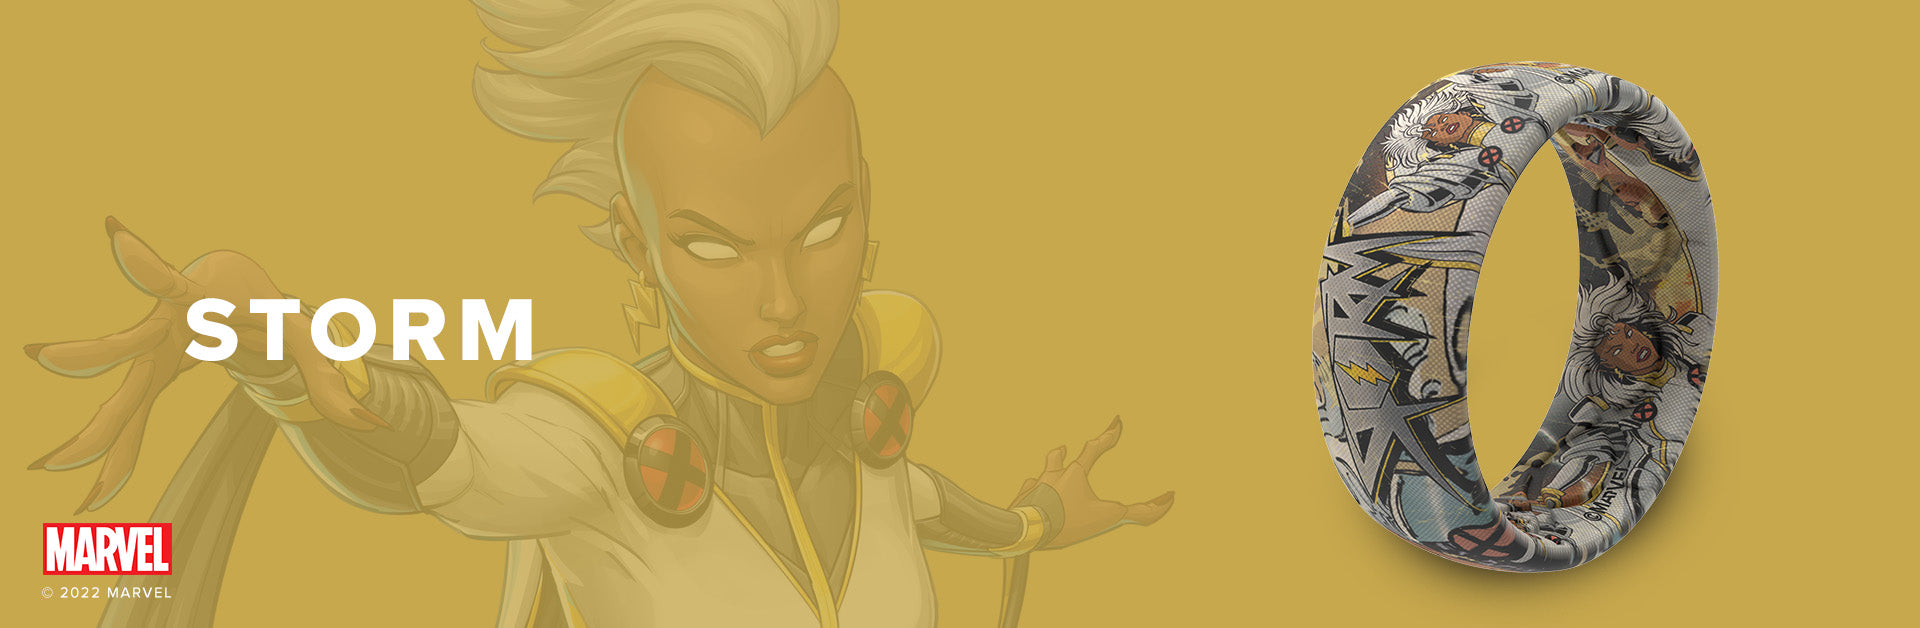 storm comic collection image